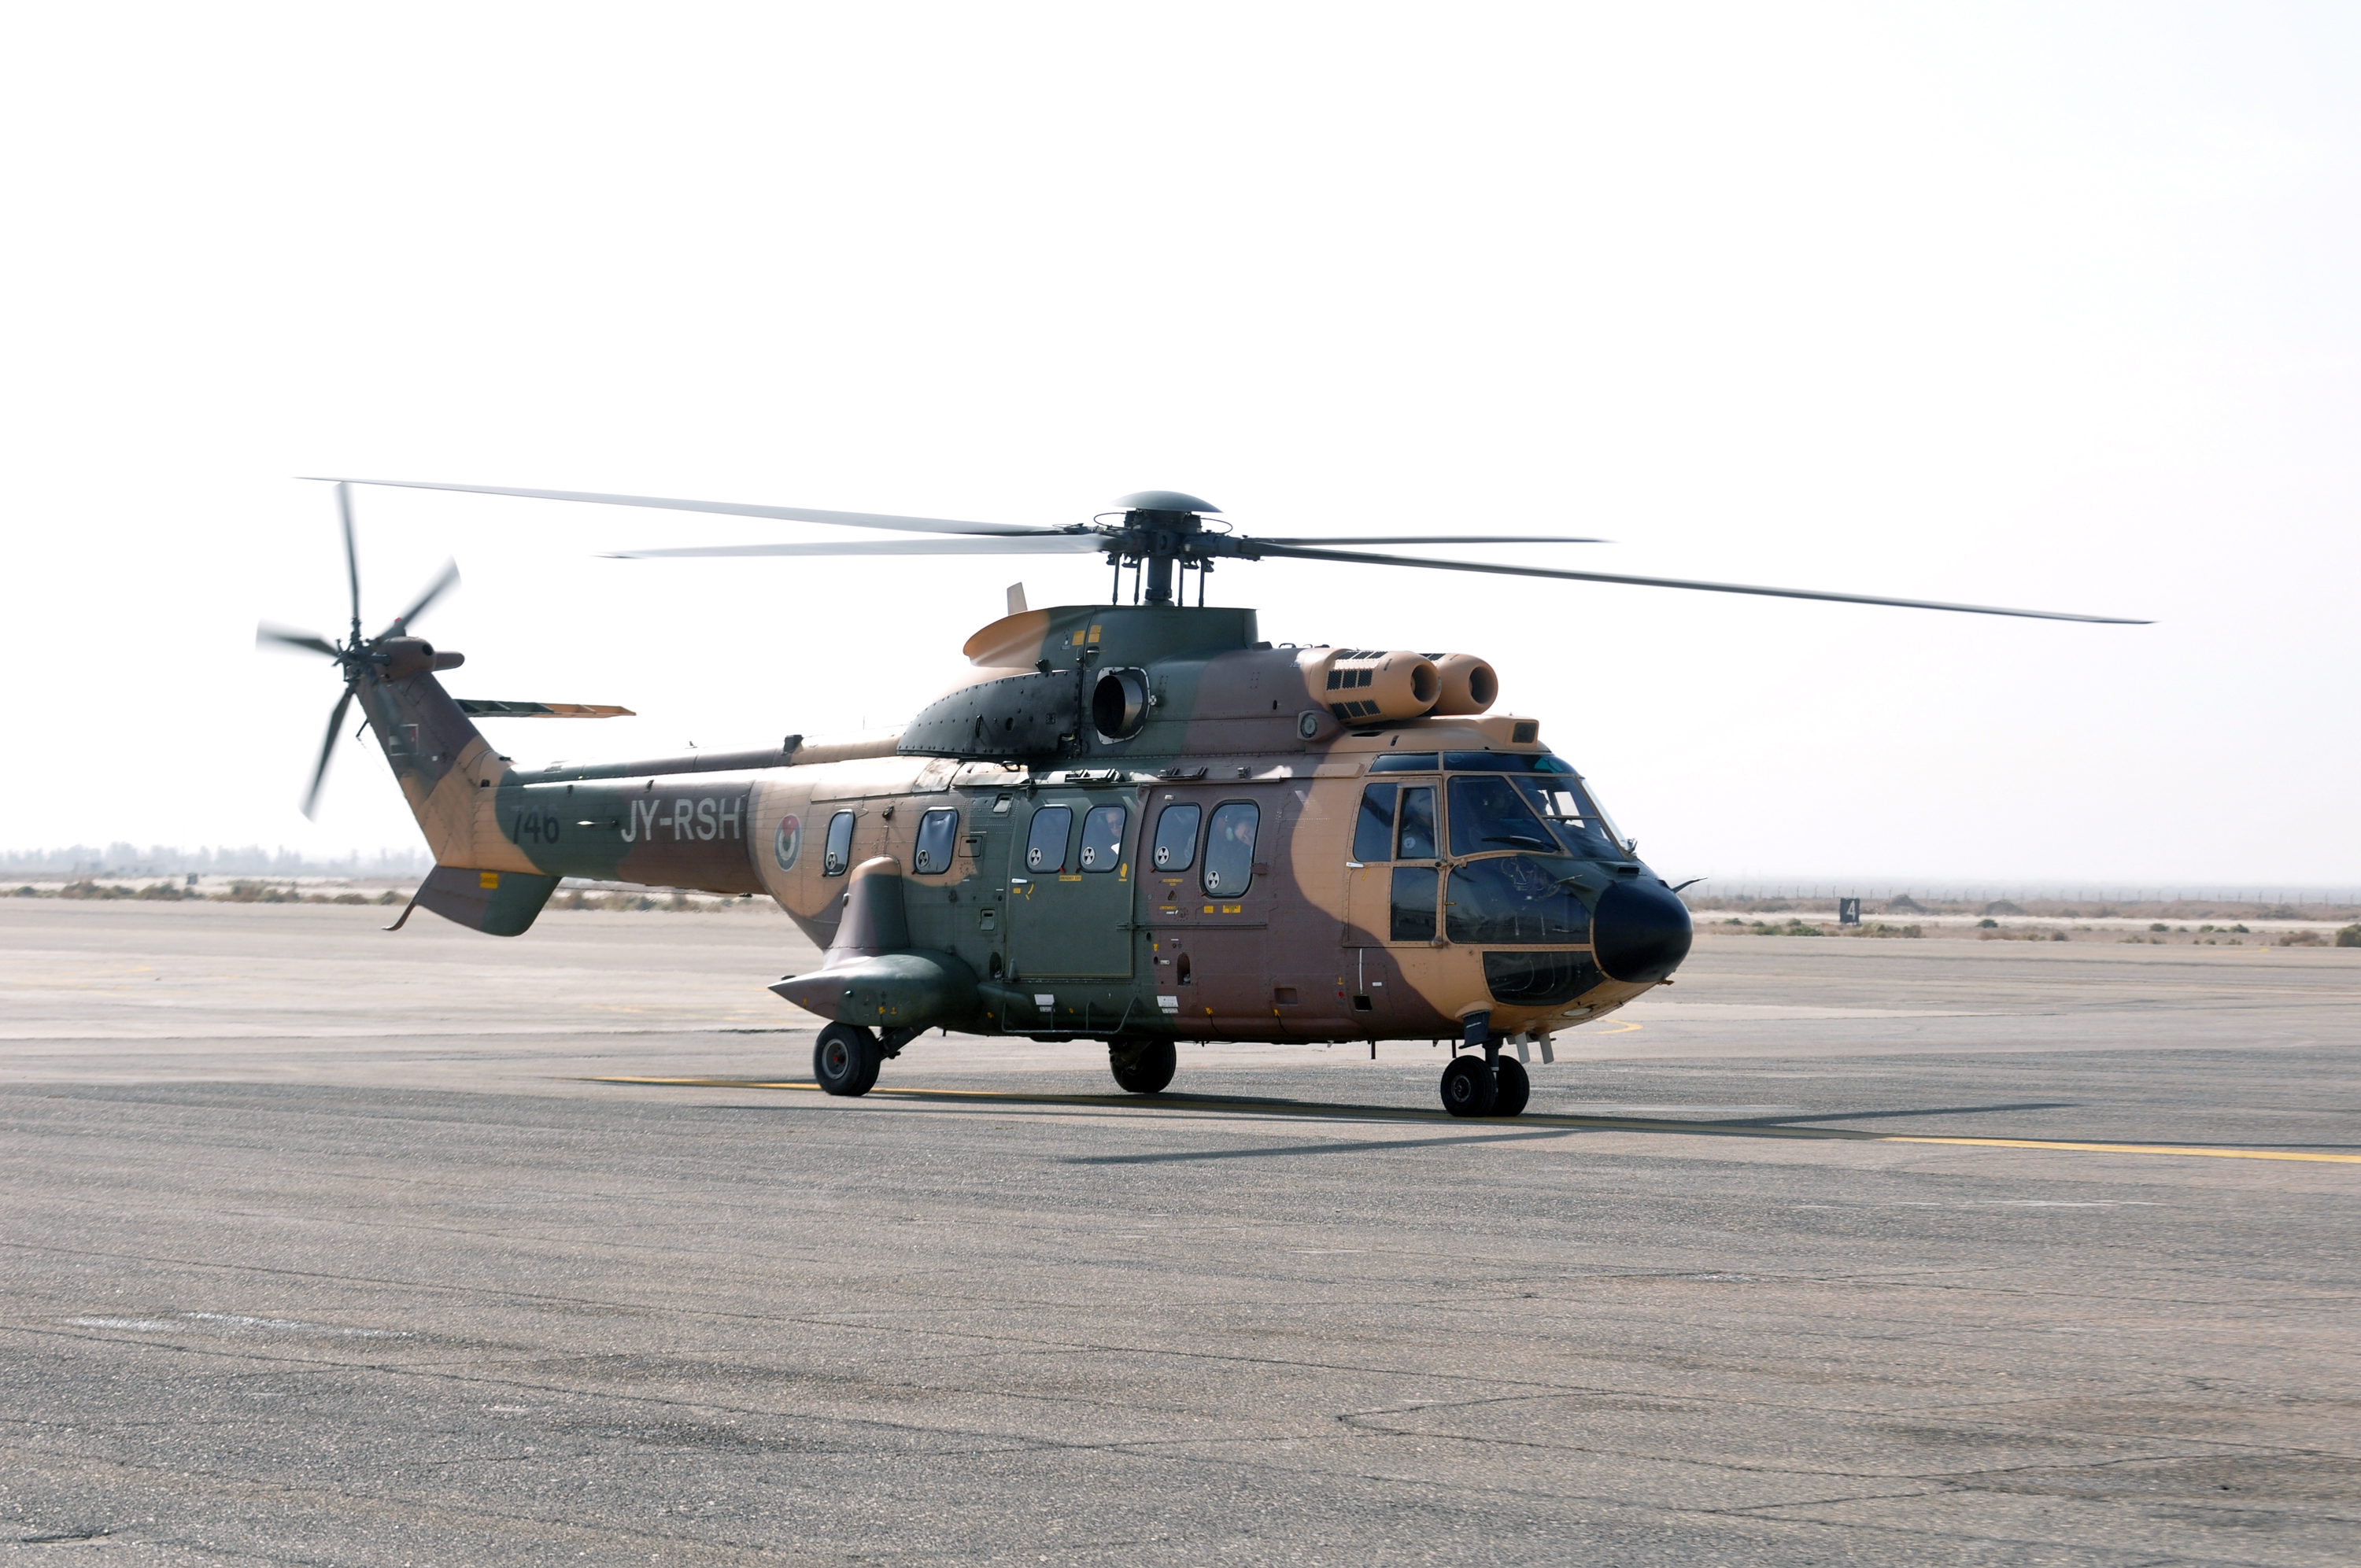 Royal Jordanian Air Force helicopter